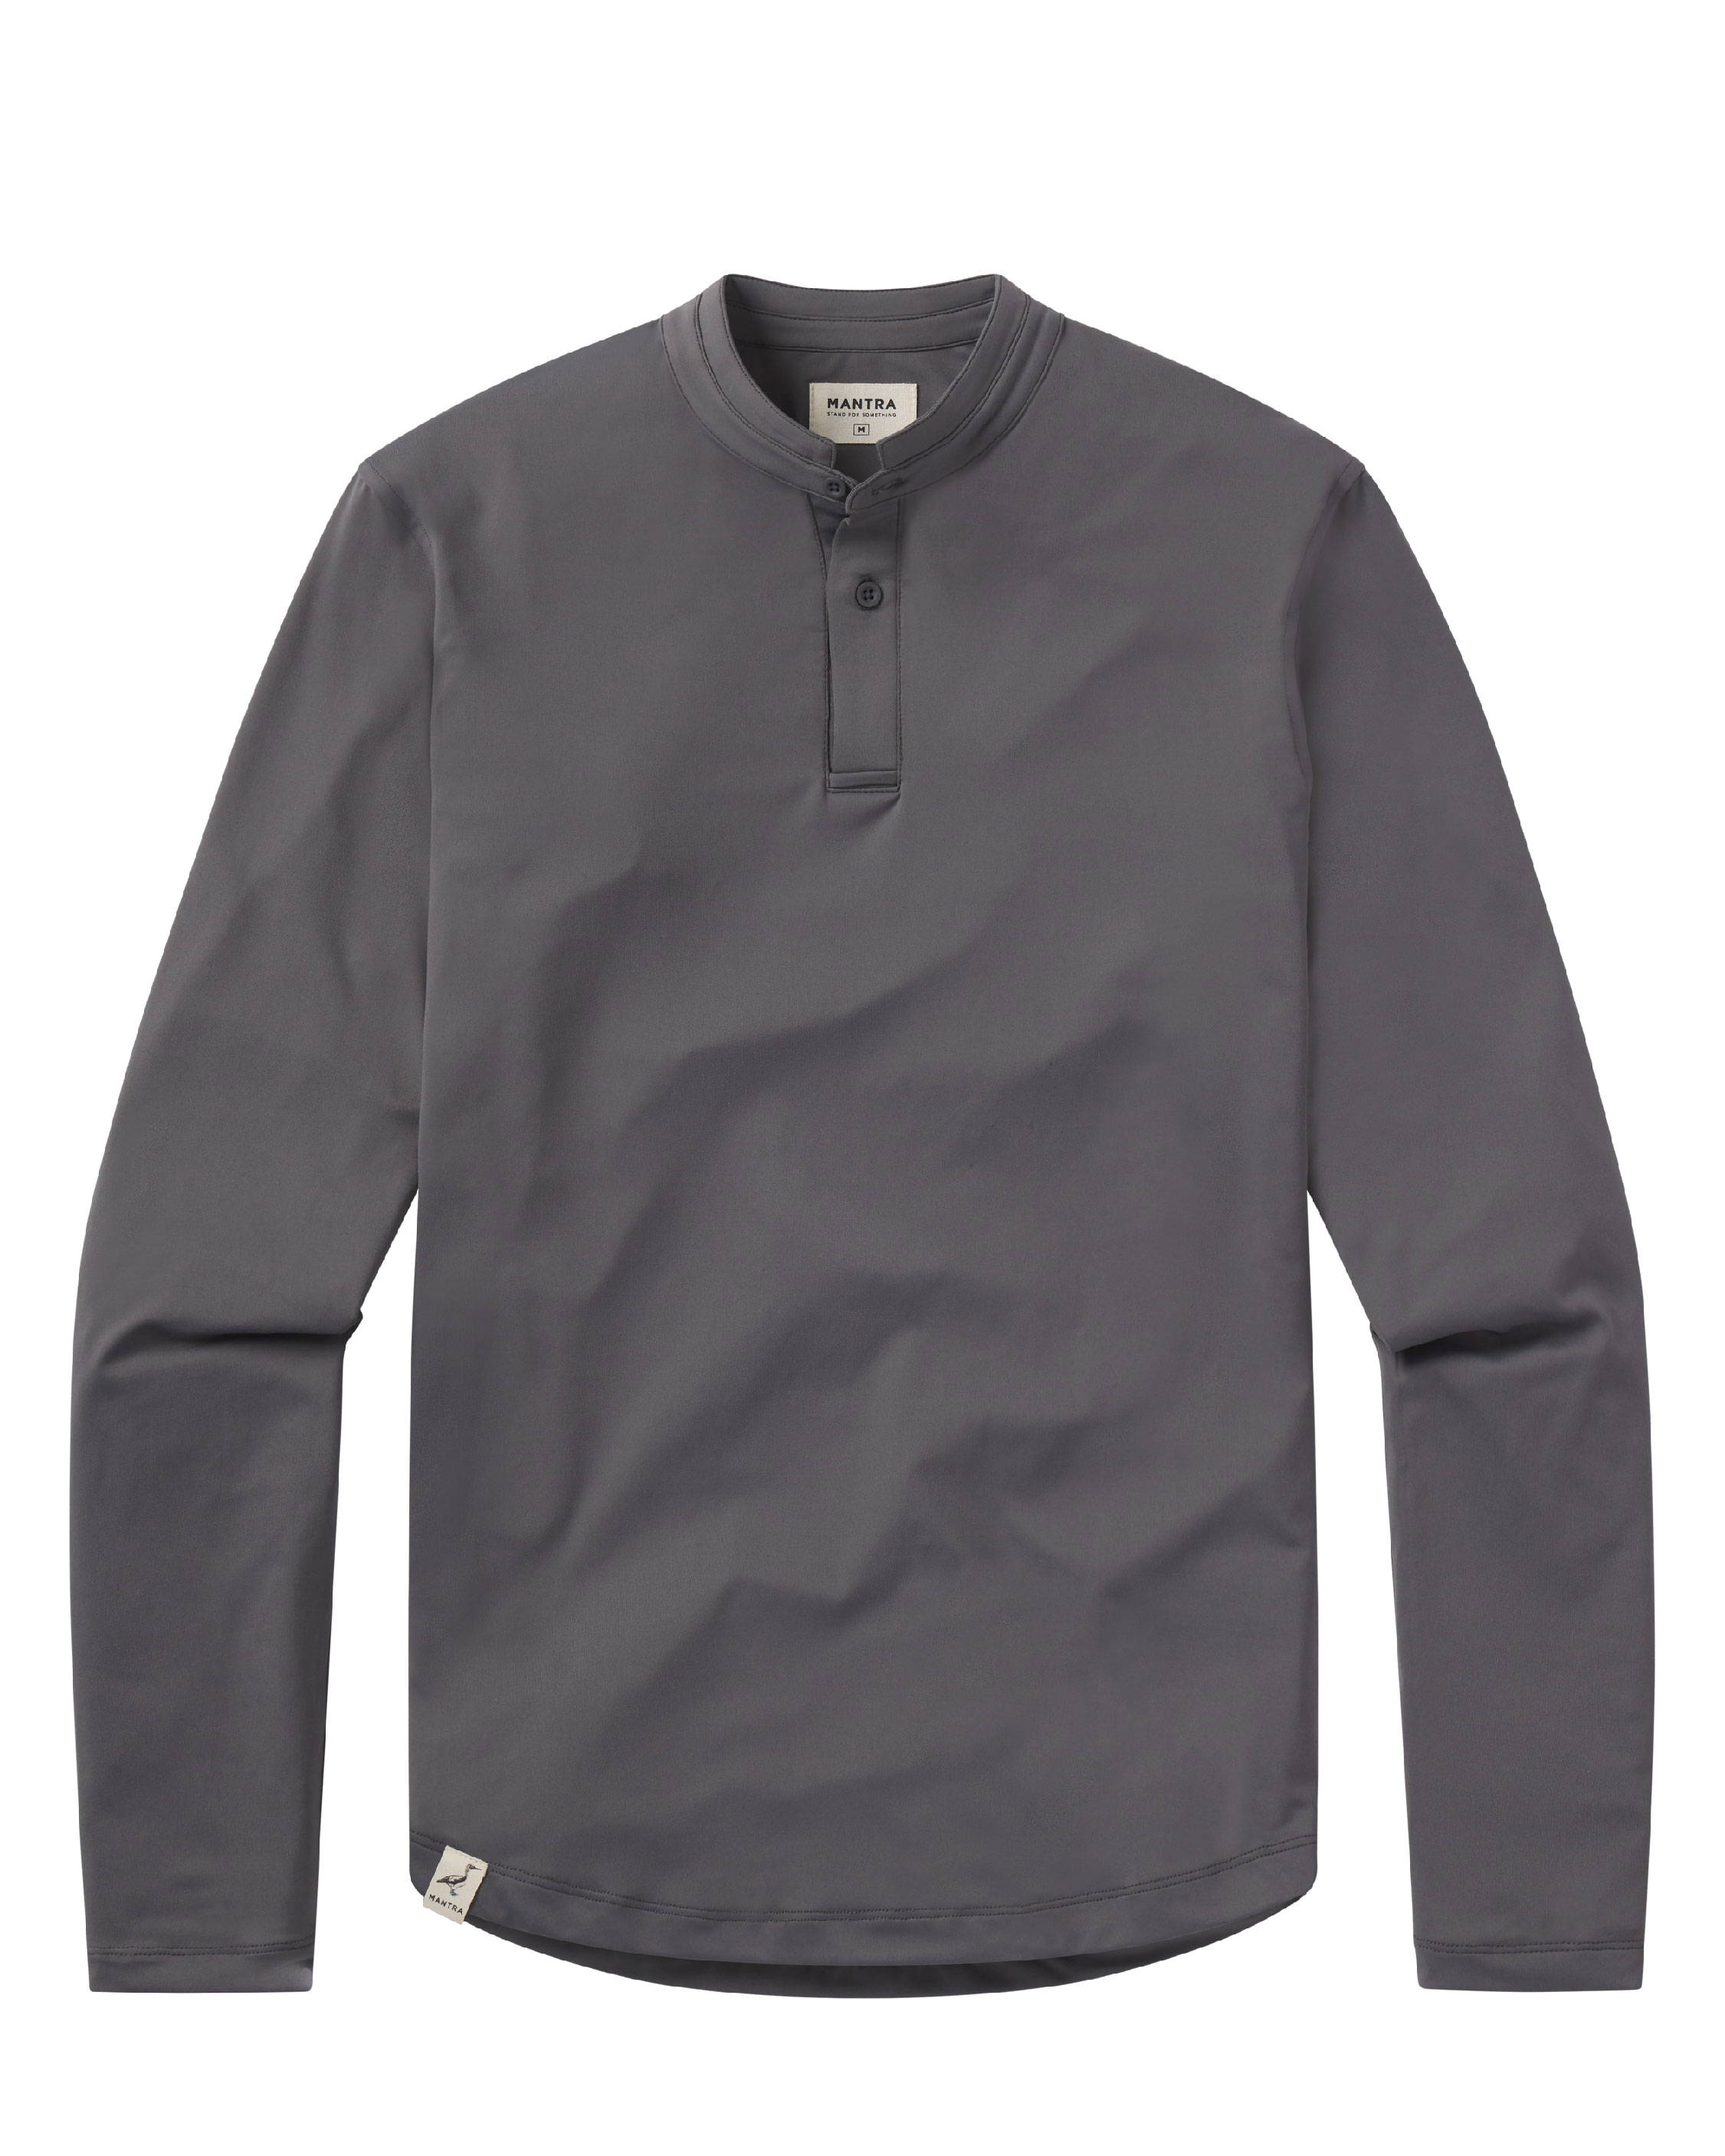 CATALYST POLO L/S - MANTRA COLLAR - VOLCANIC ASH color selector